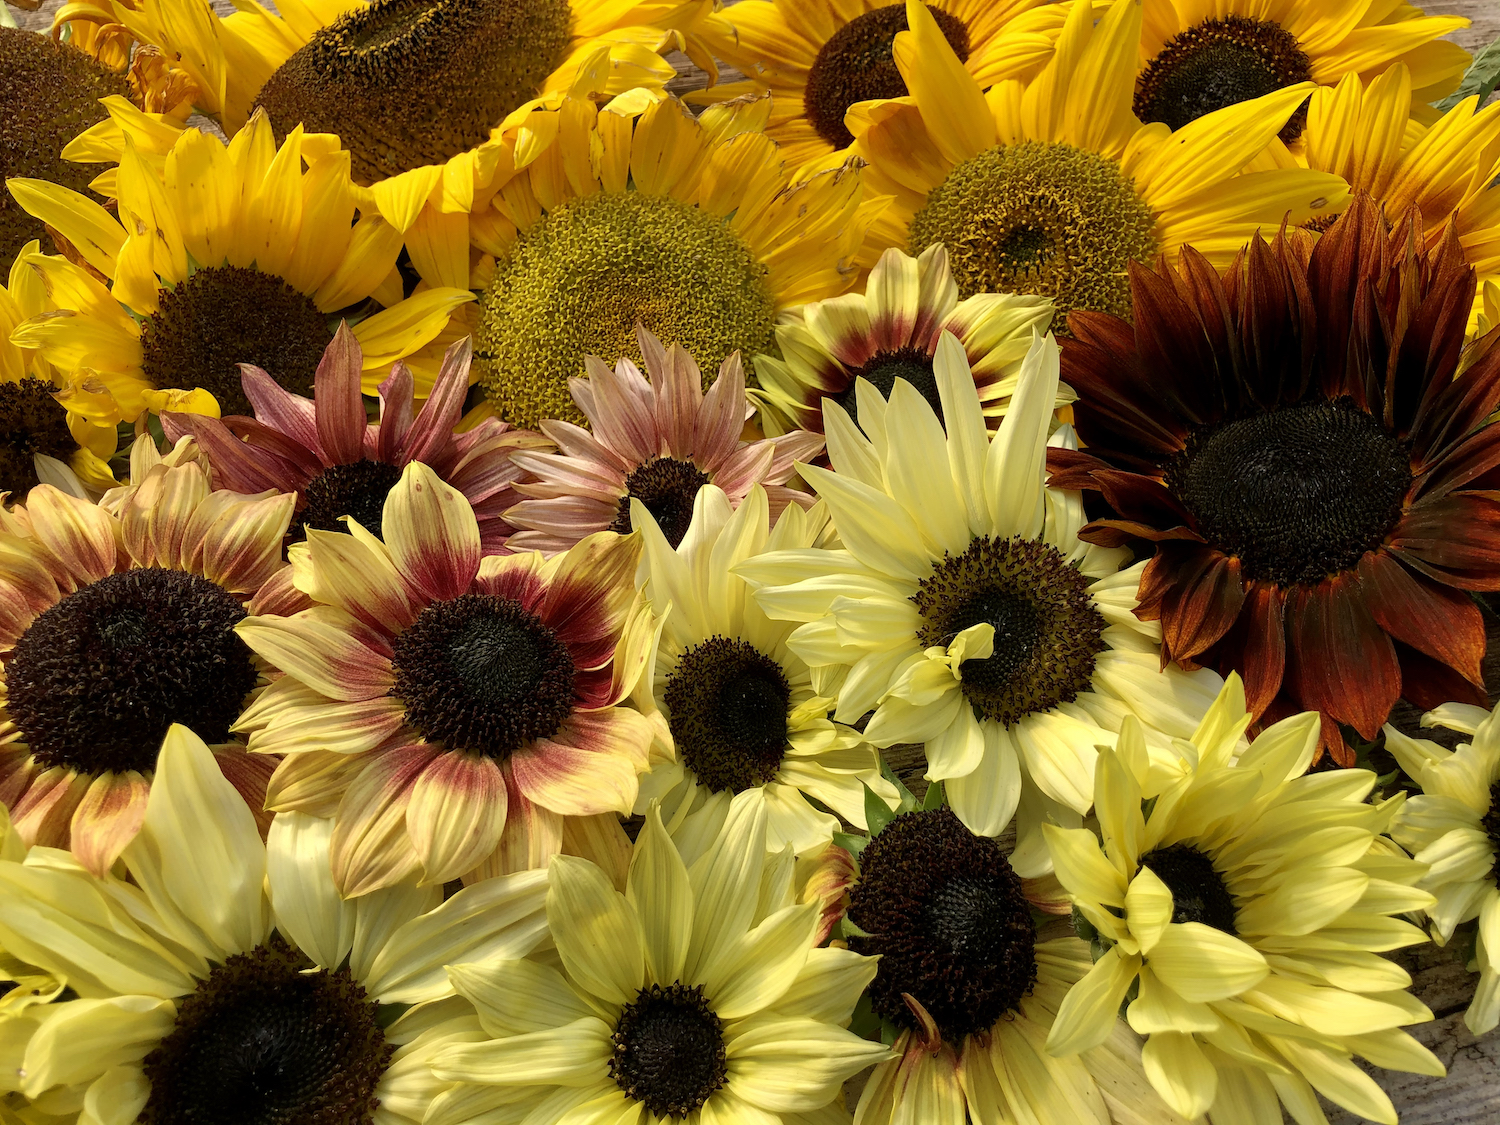 An array of autumnal edible sunflowers in oranges, rusts, yellows